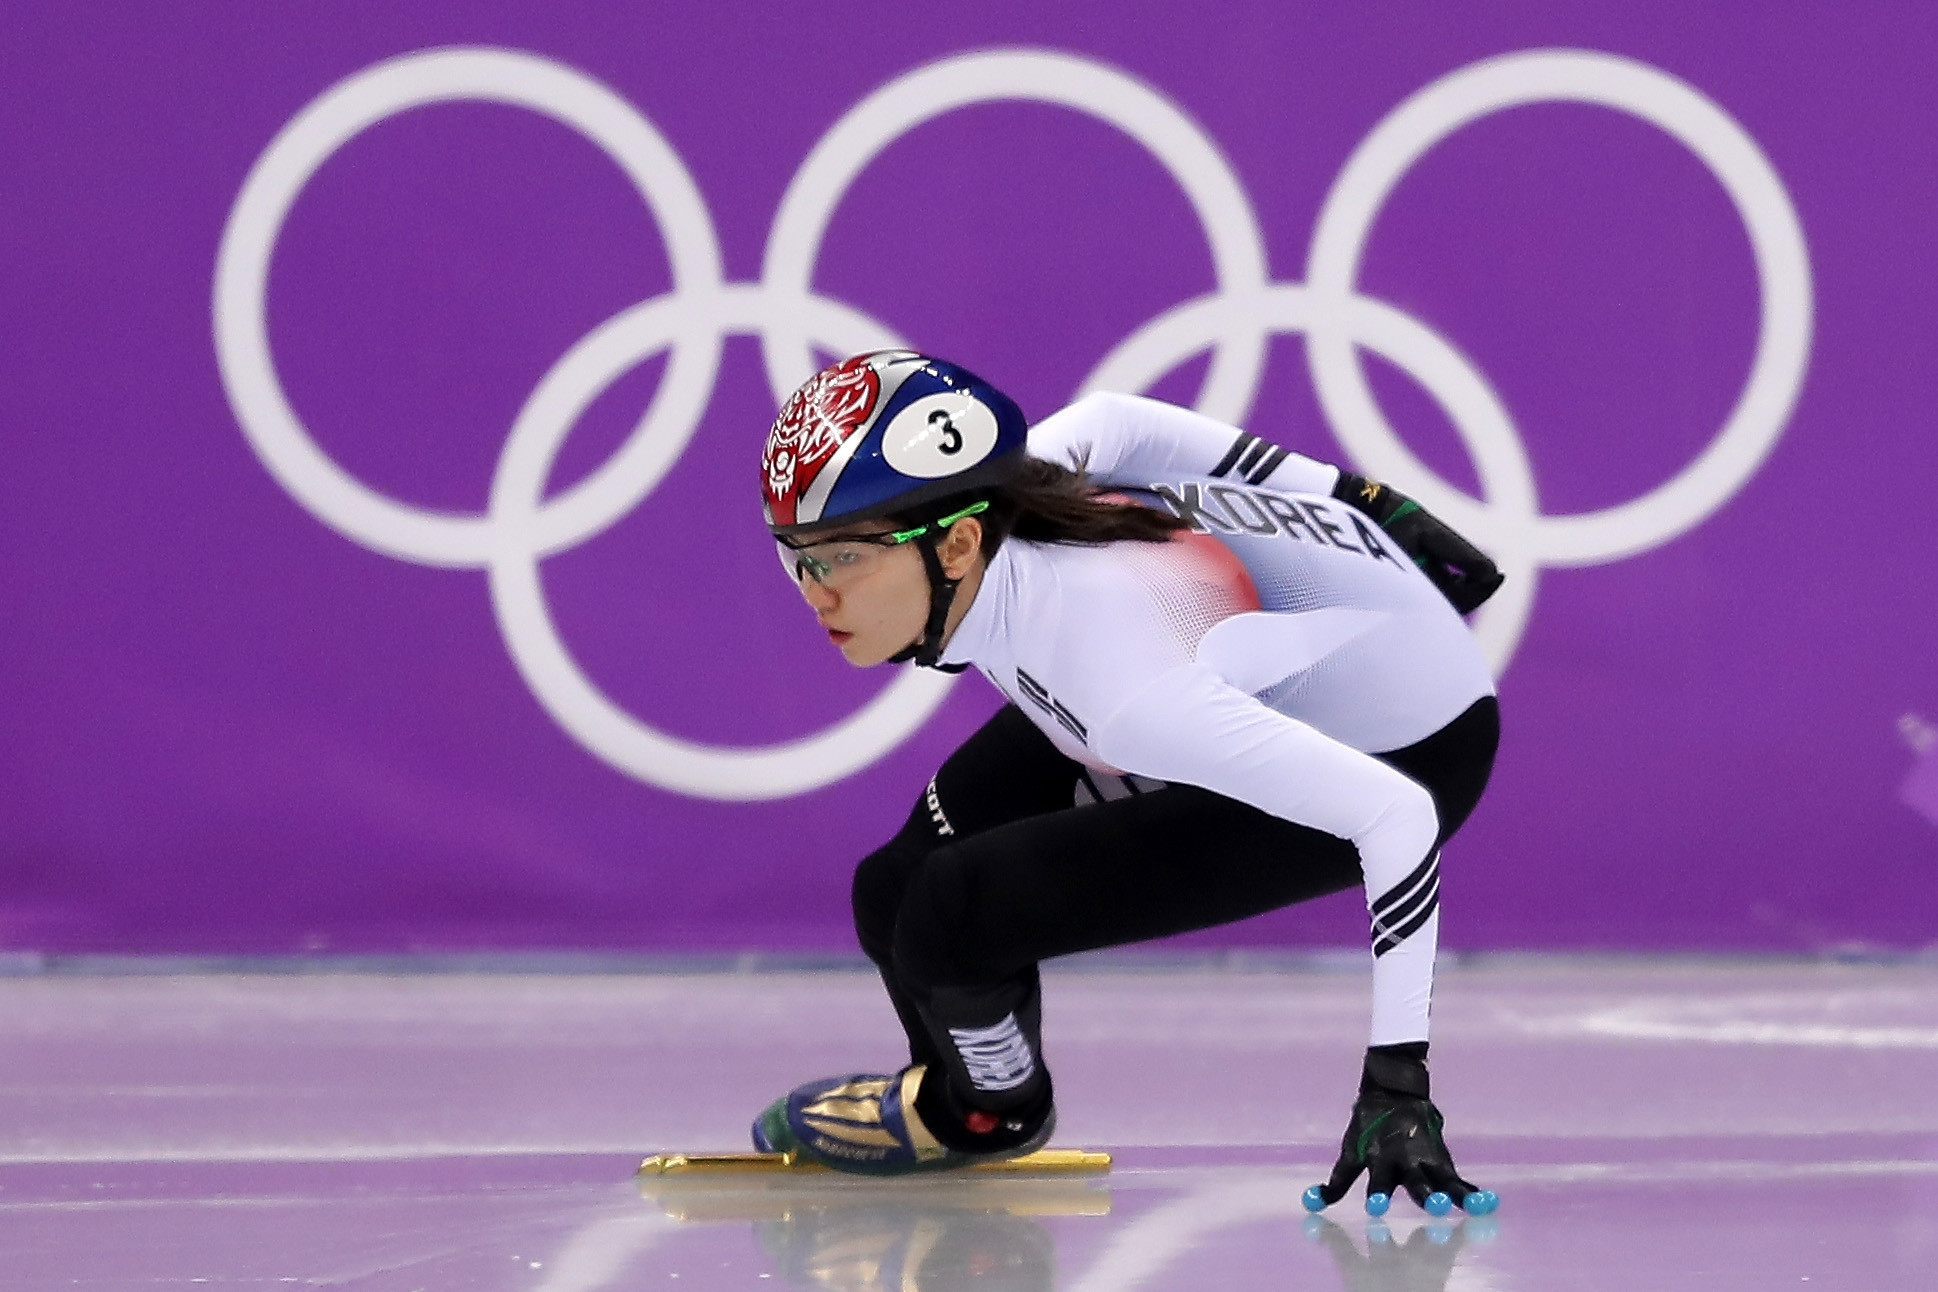 Shim Suk-hee is hoping to overturn a ban that keeps her out of the Beijing 2022 Winter Olympics ©Getty Images